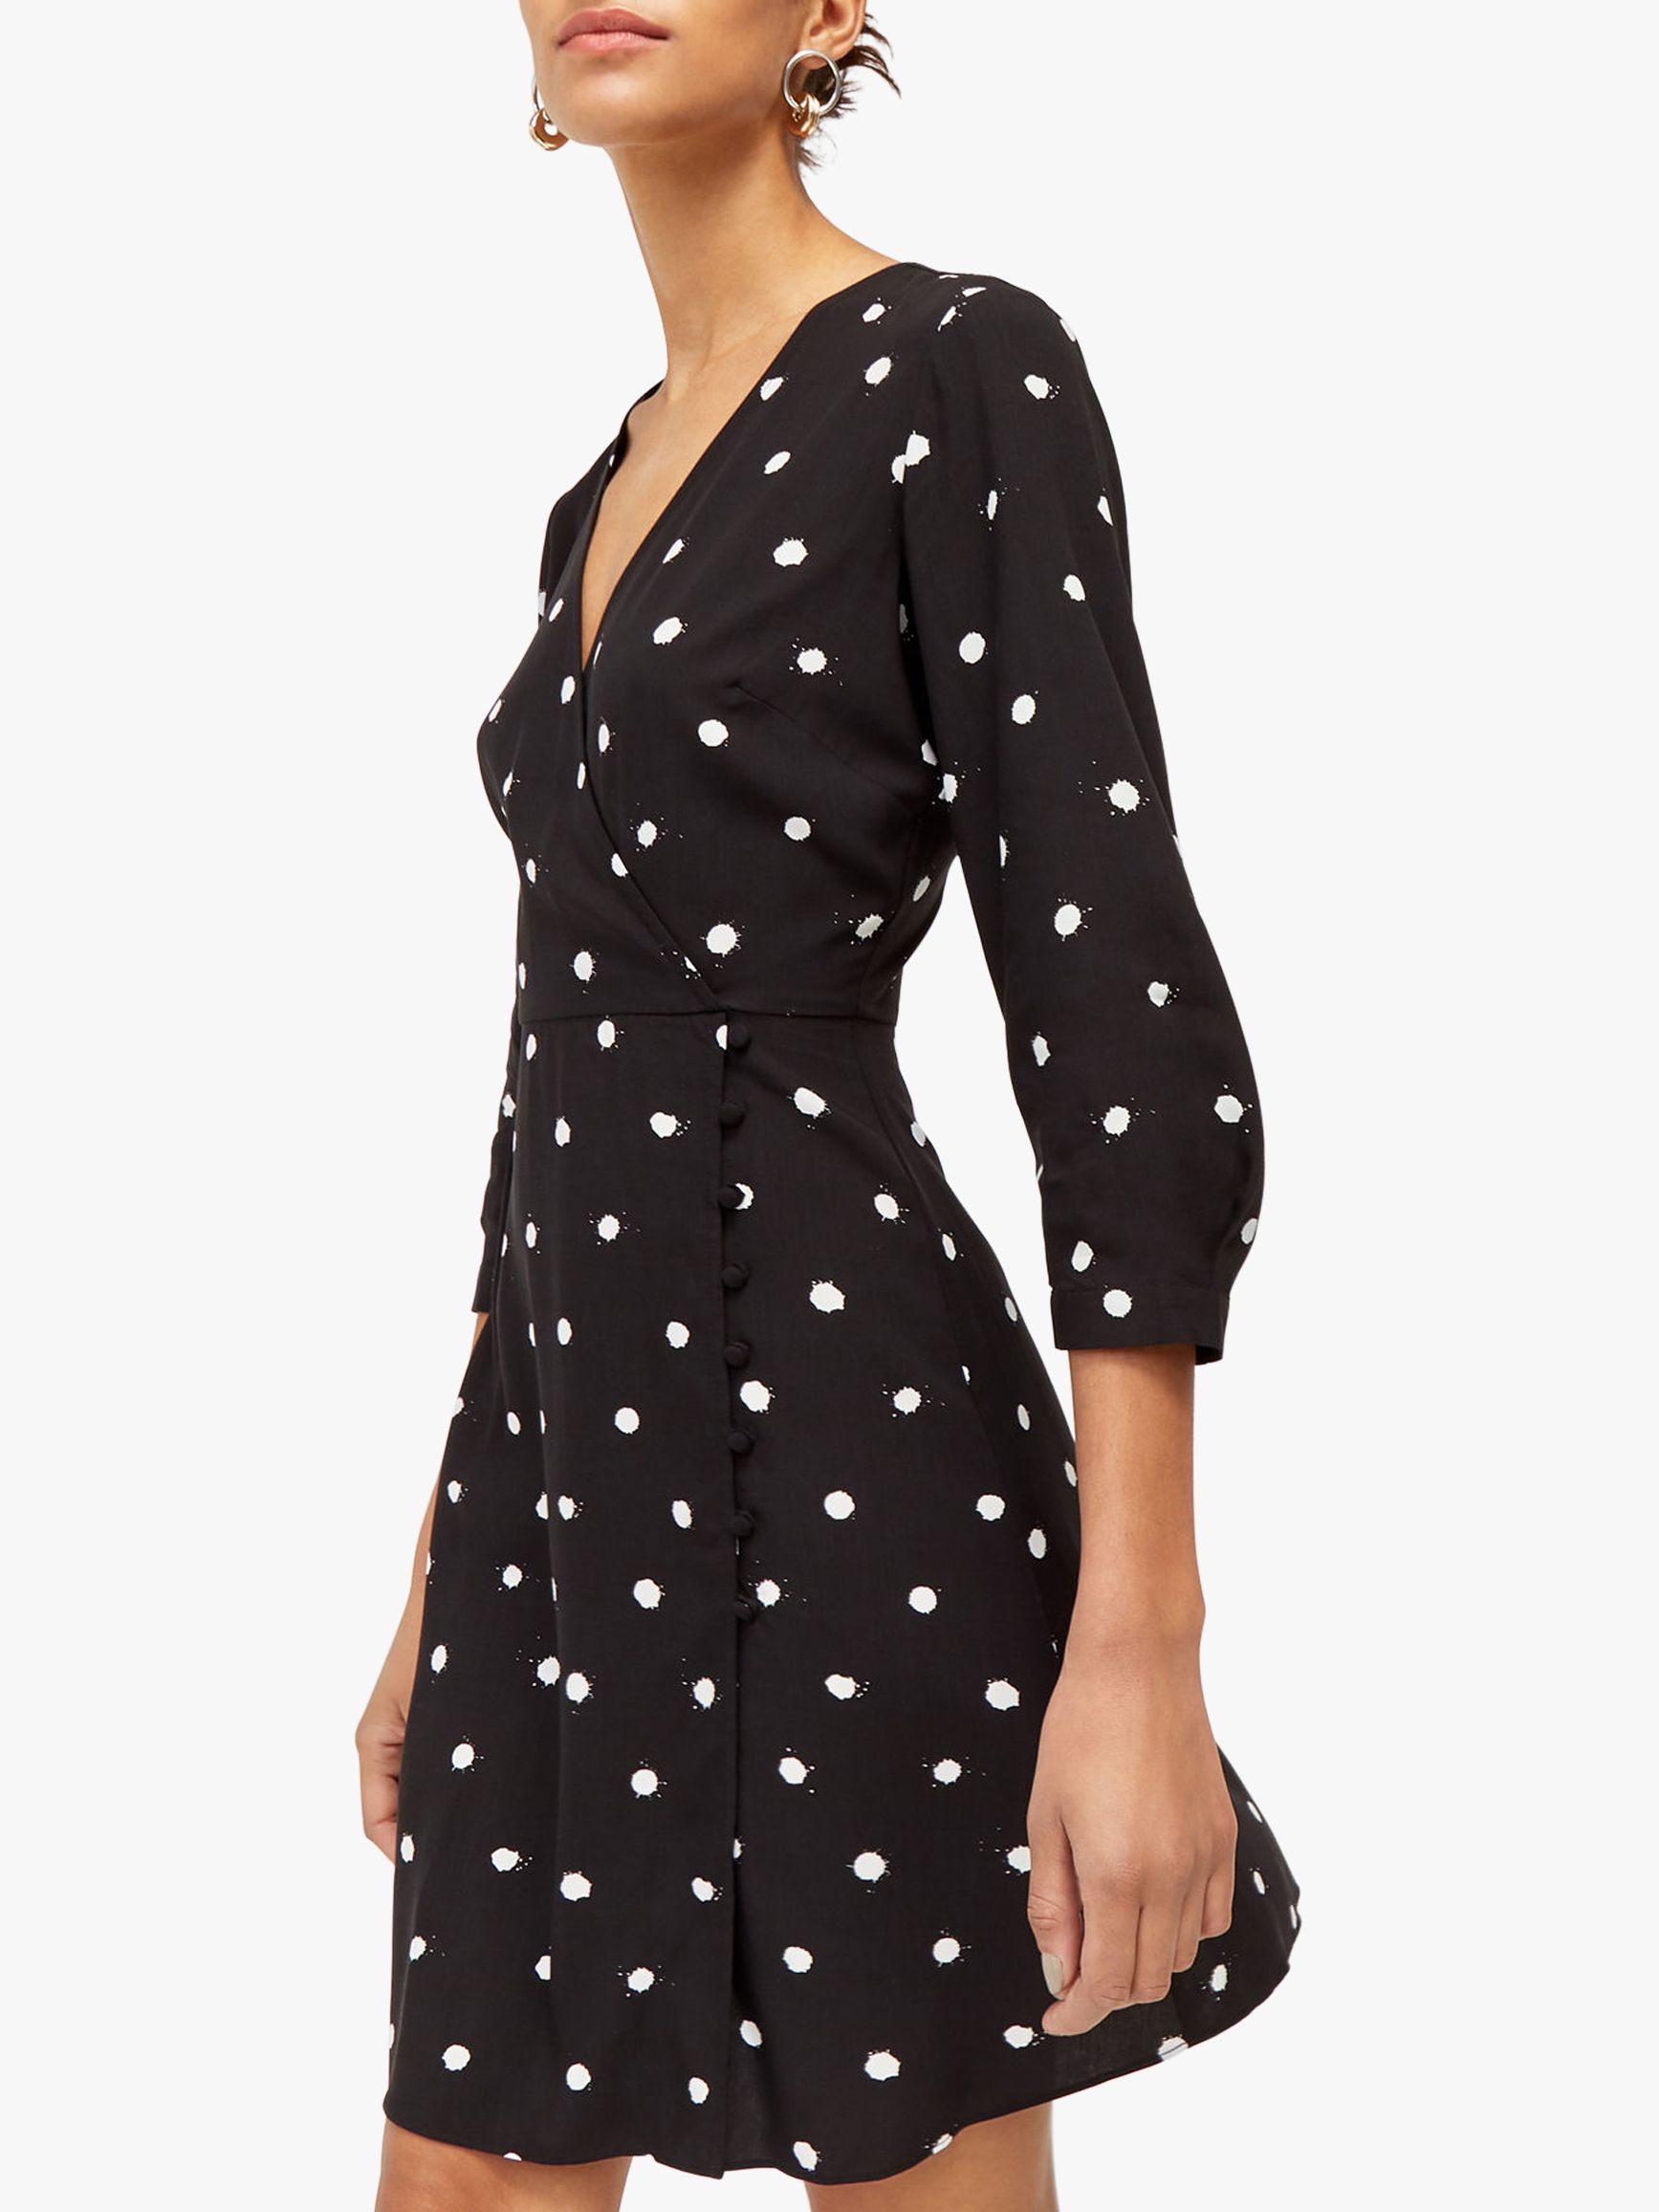 black and white spotted wrap dress